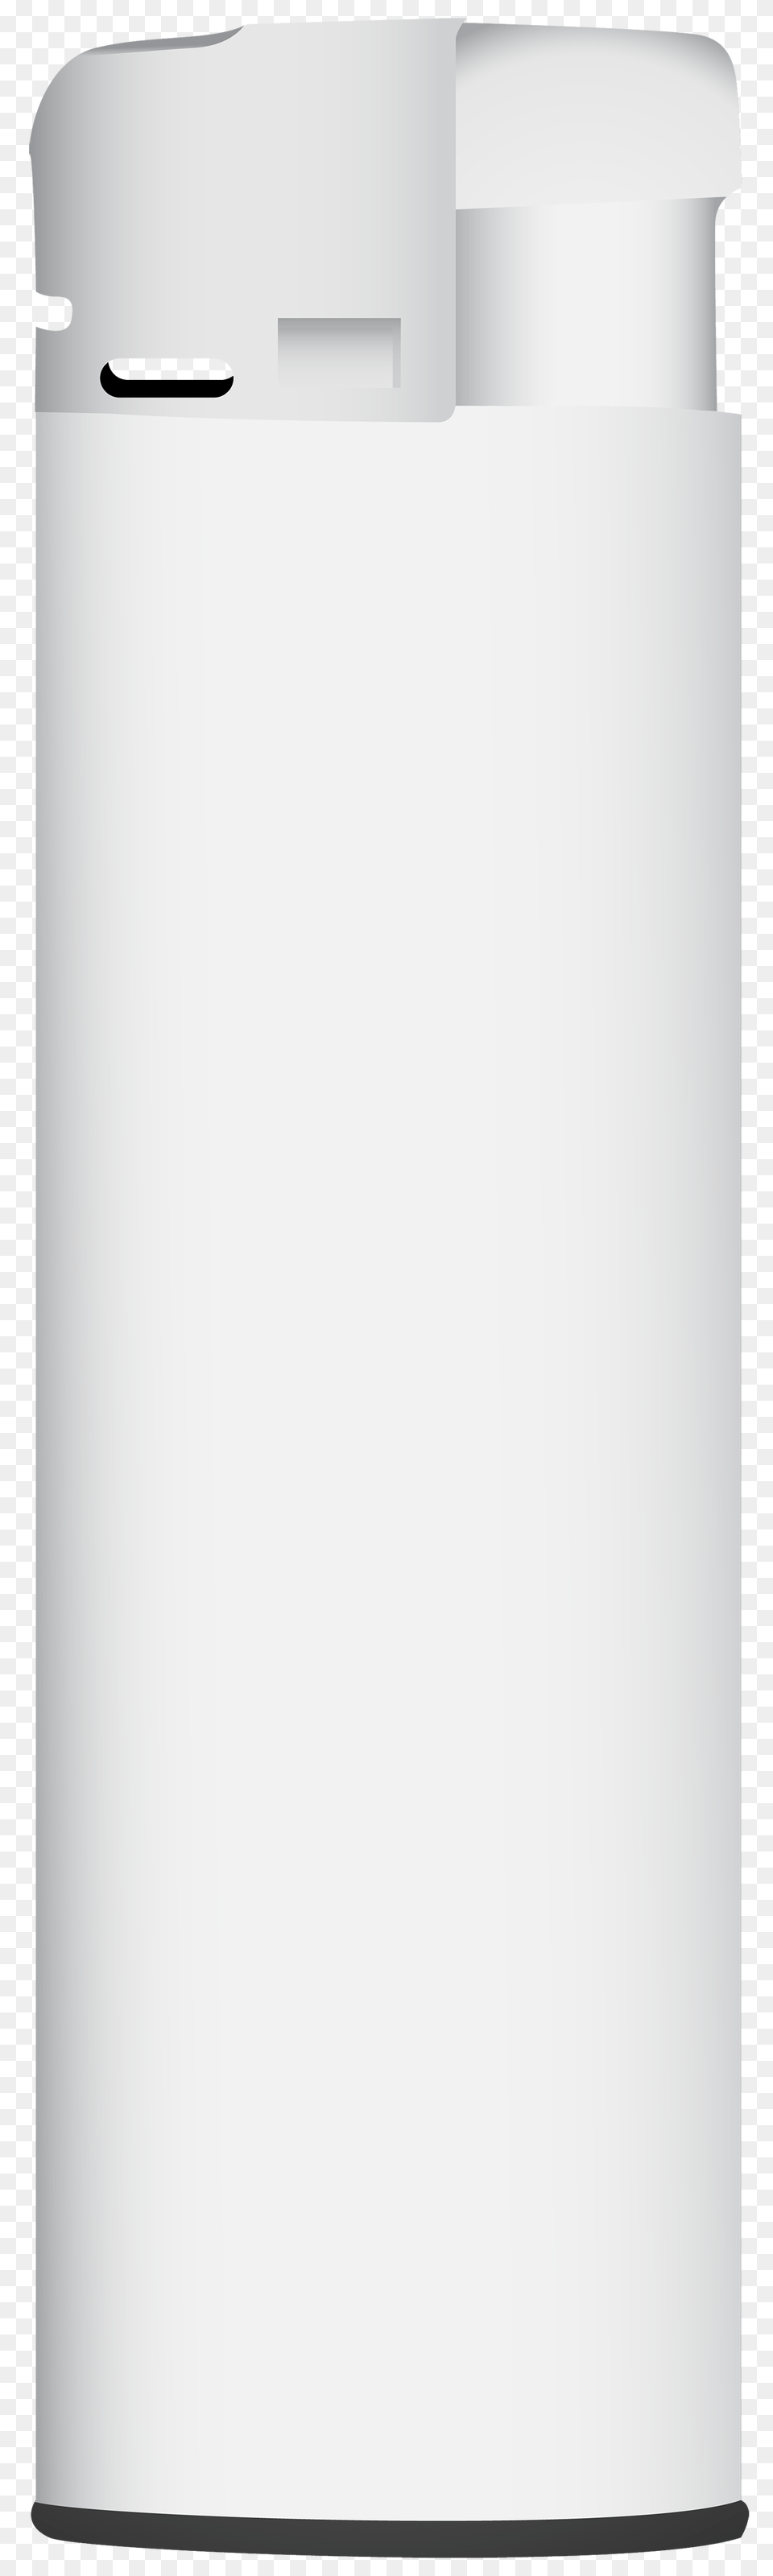 Lighter, Device, Appliance, Electrical Device, Dishwasher Png